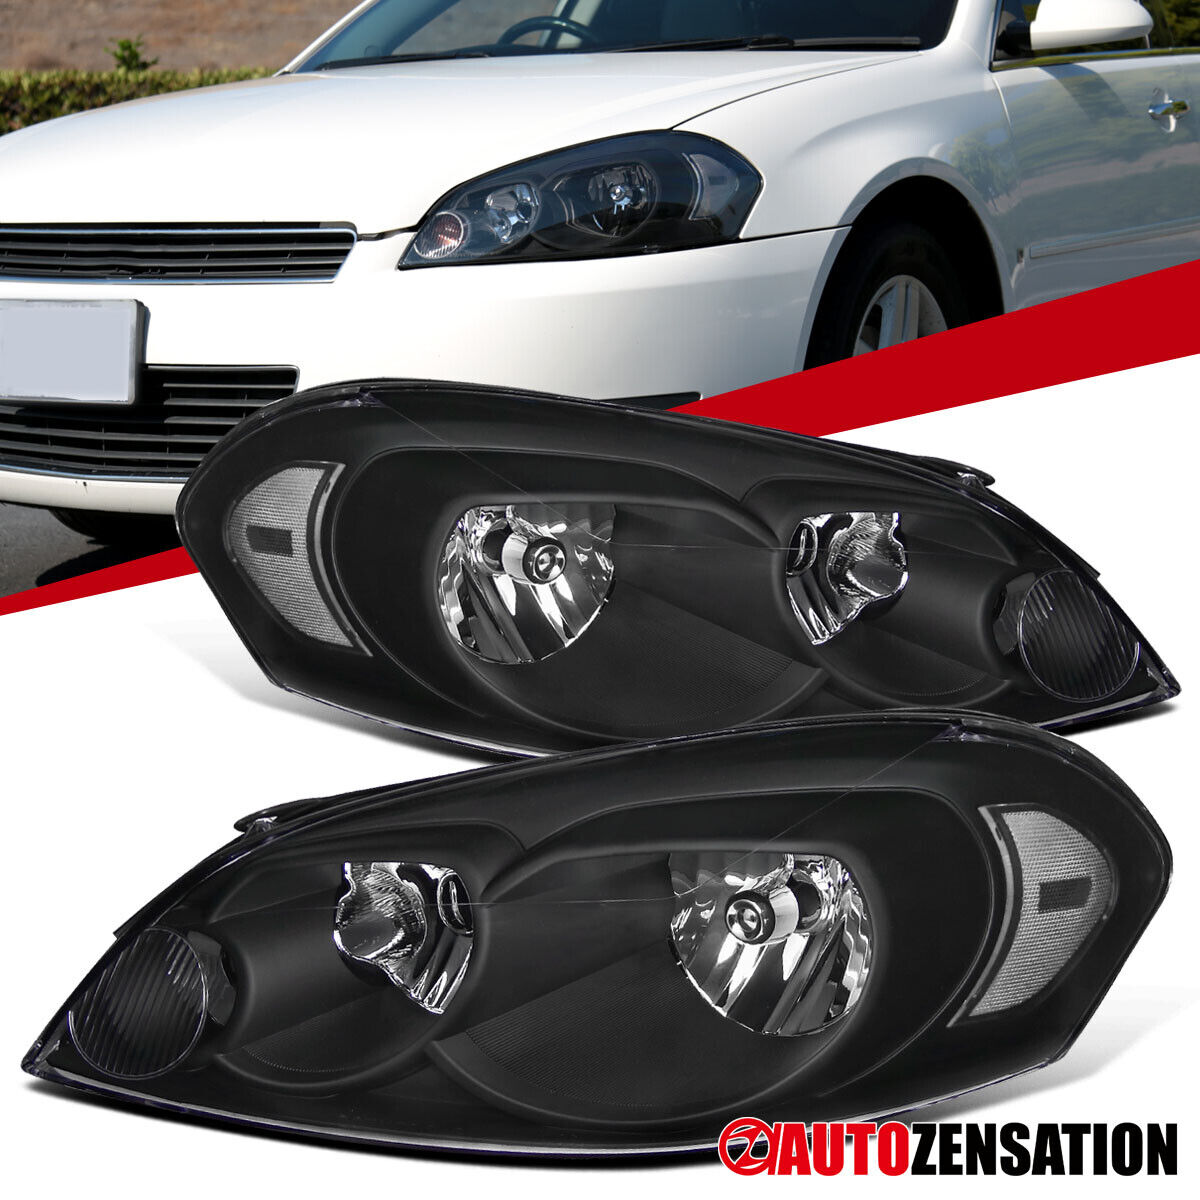 Fit 2006-2013 Chevy Impala 06-07 Monte Carlo Headlights Headlamps Assembly Set